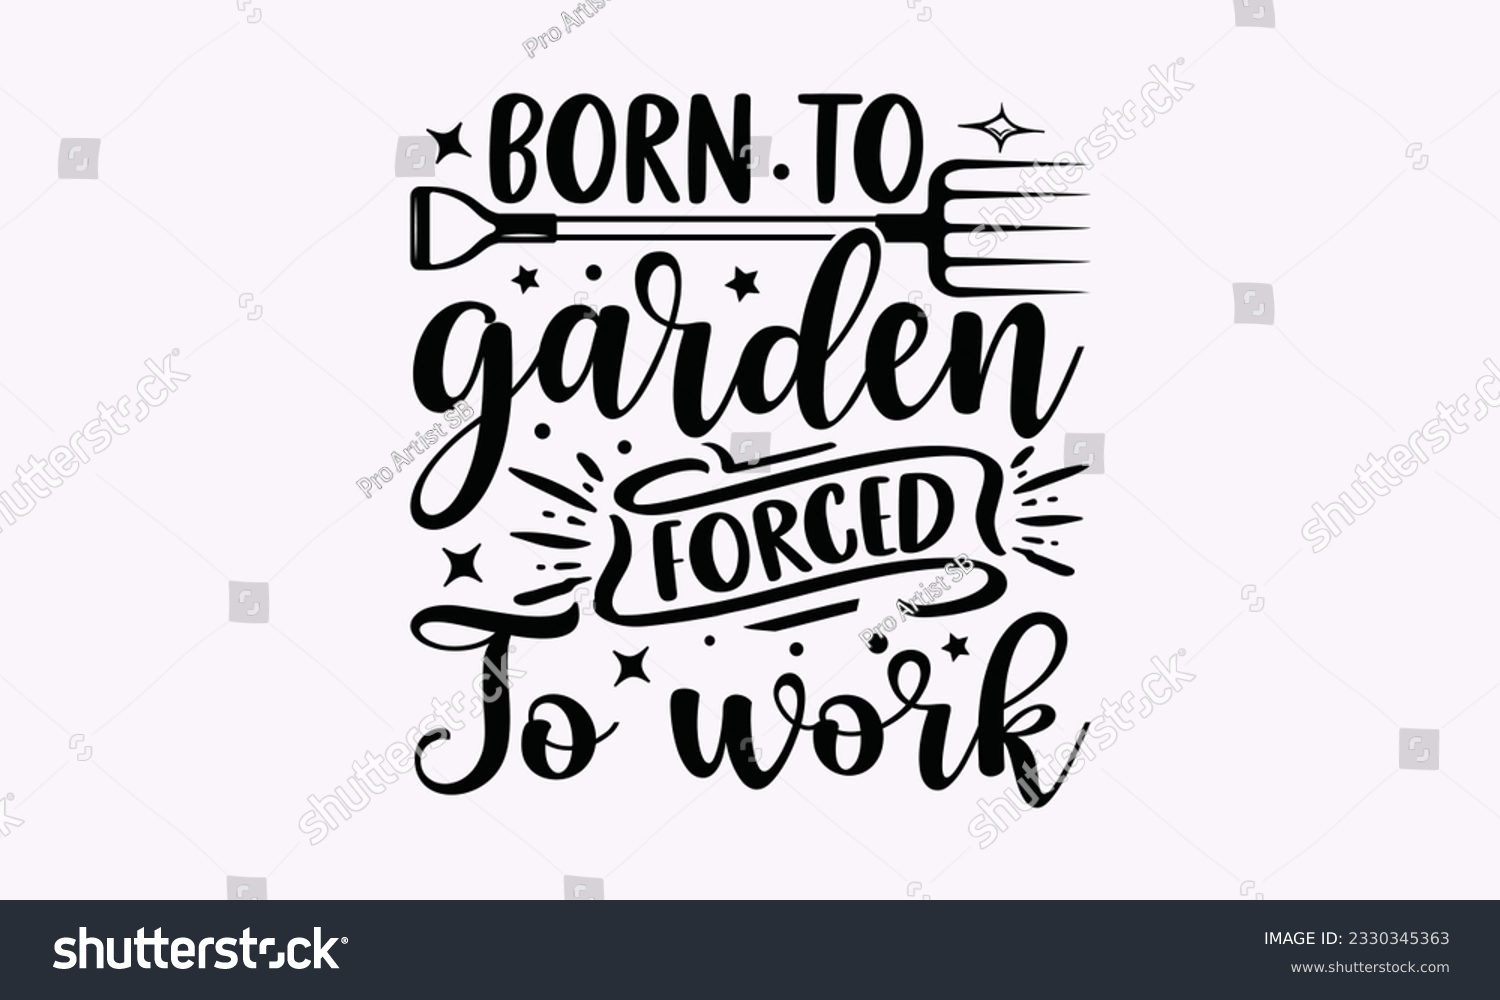 SVG of Born to garden forced to work - Gardening SVG Design, plant Quotes, Hand drawn lettering phrase, Isolated on white background. svg